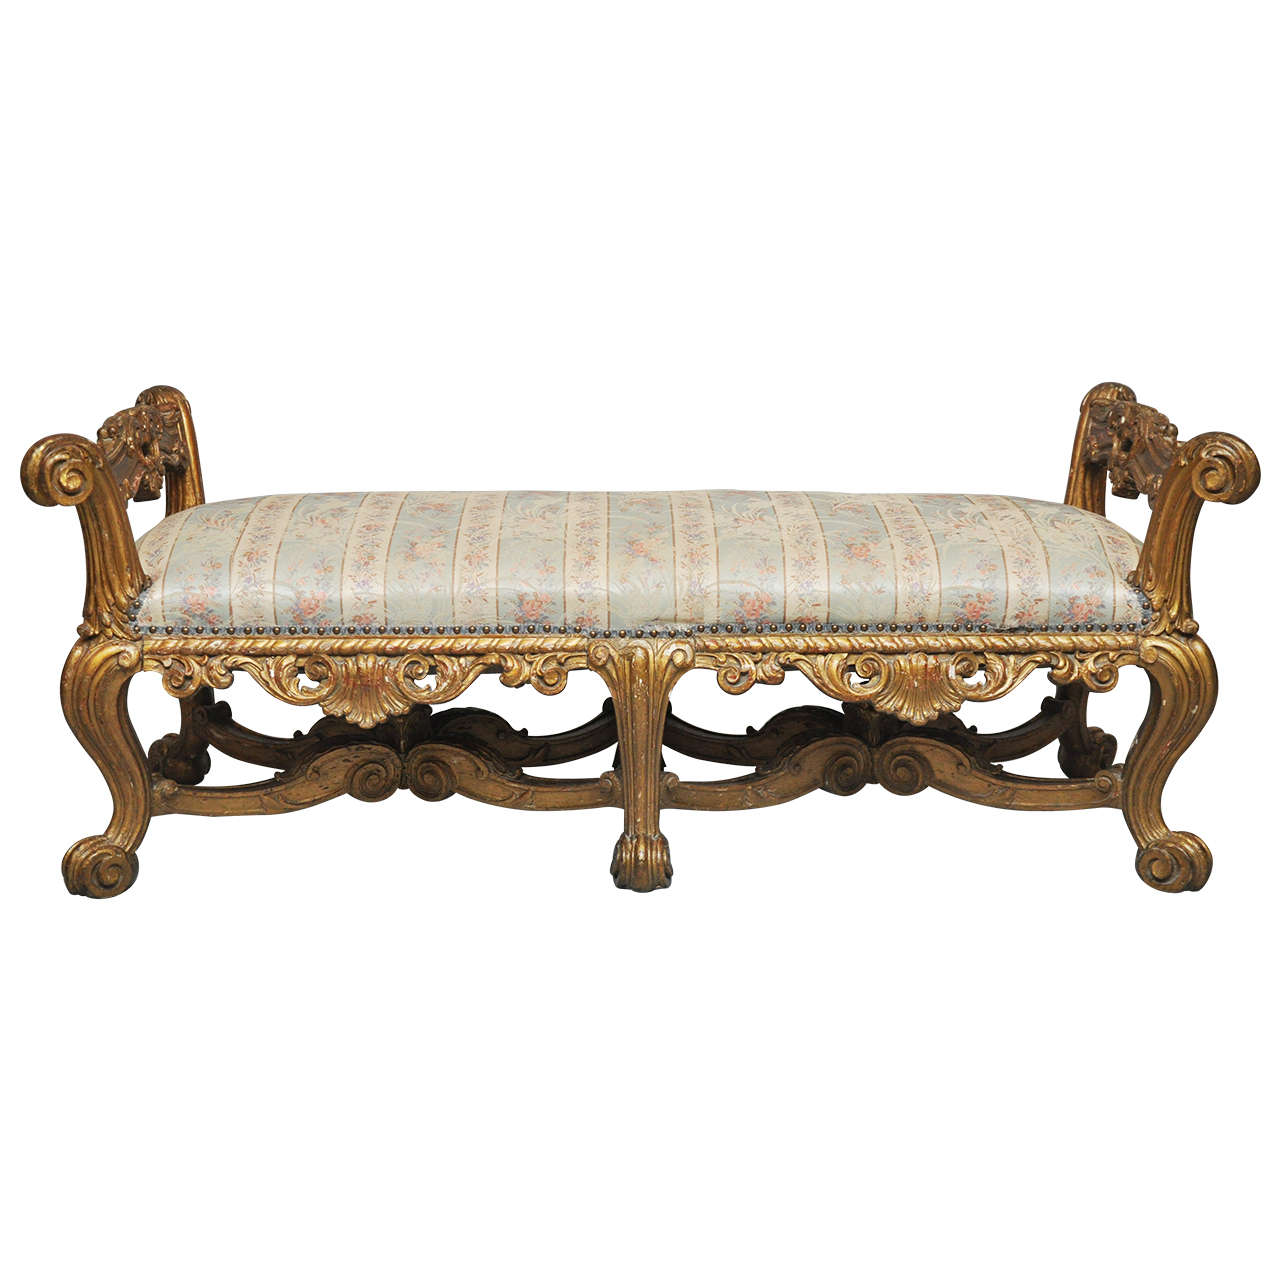 19th Century French Rococo Style Giltwood Bench